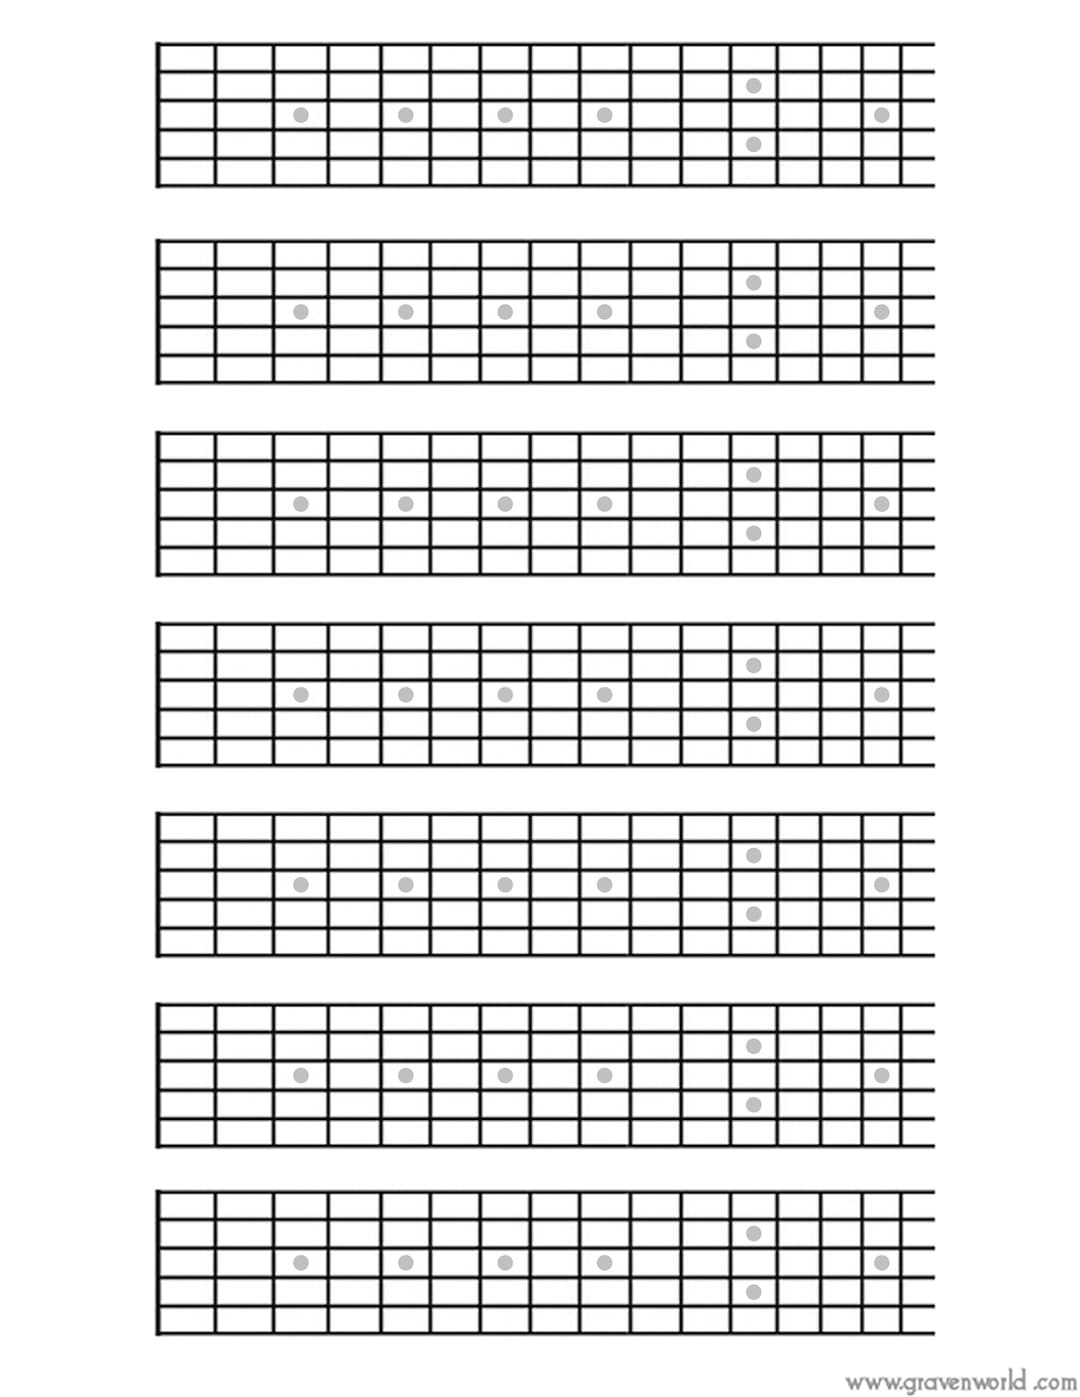 6 String Printable Guitar Blank Fretboard Chart Diagrams Songwriting Tool For Guitar Players Instant Download And Printable PDF Etsy